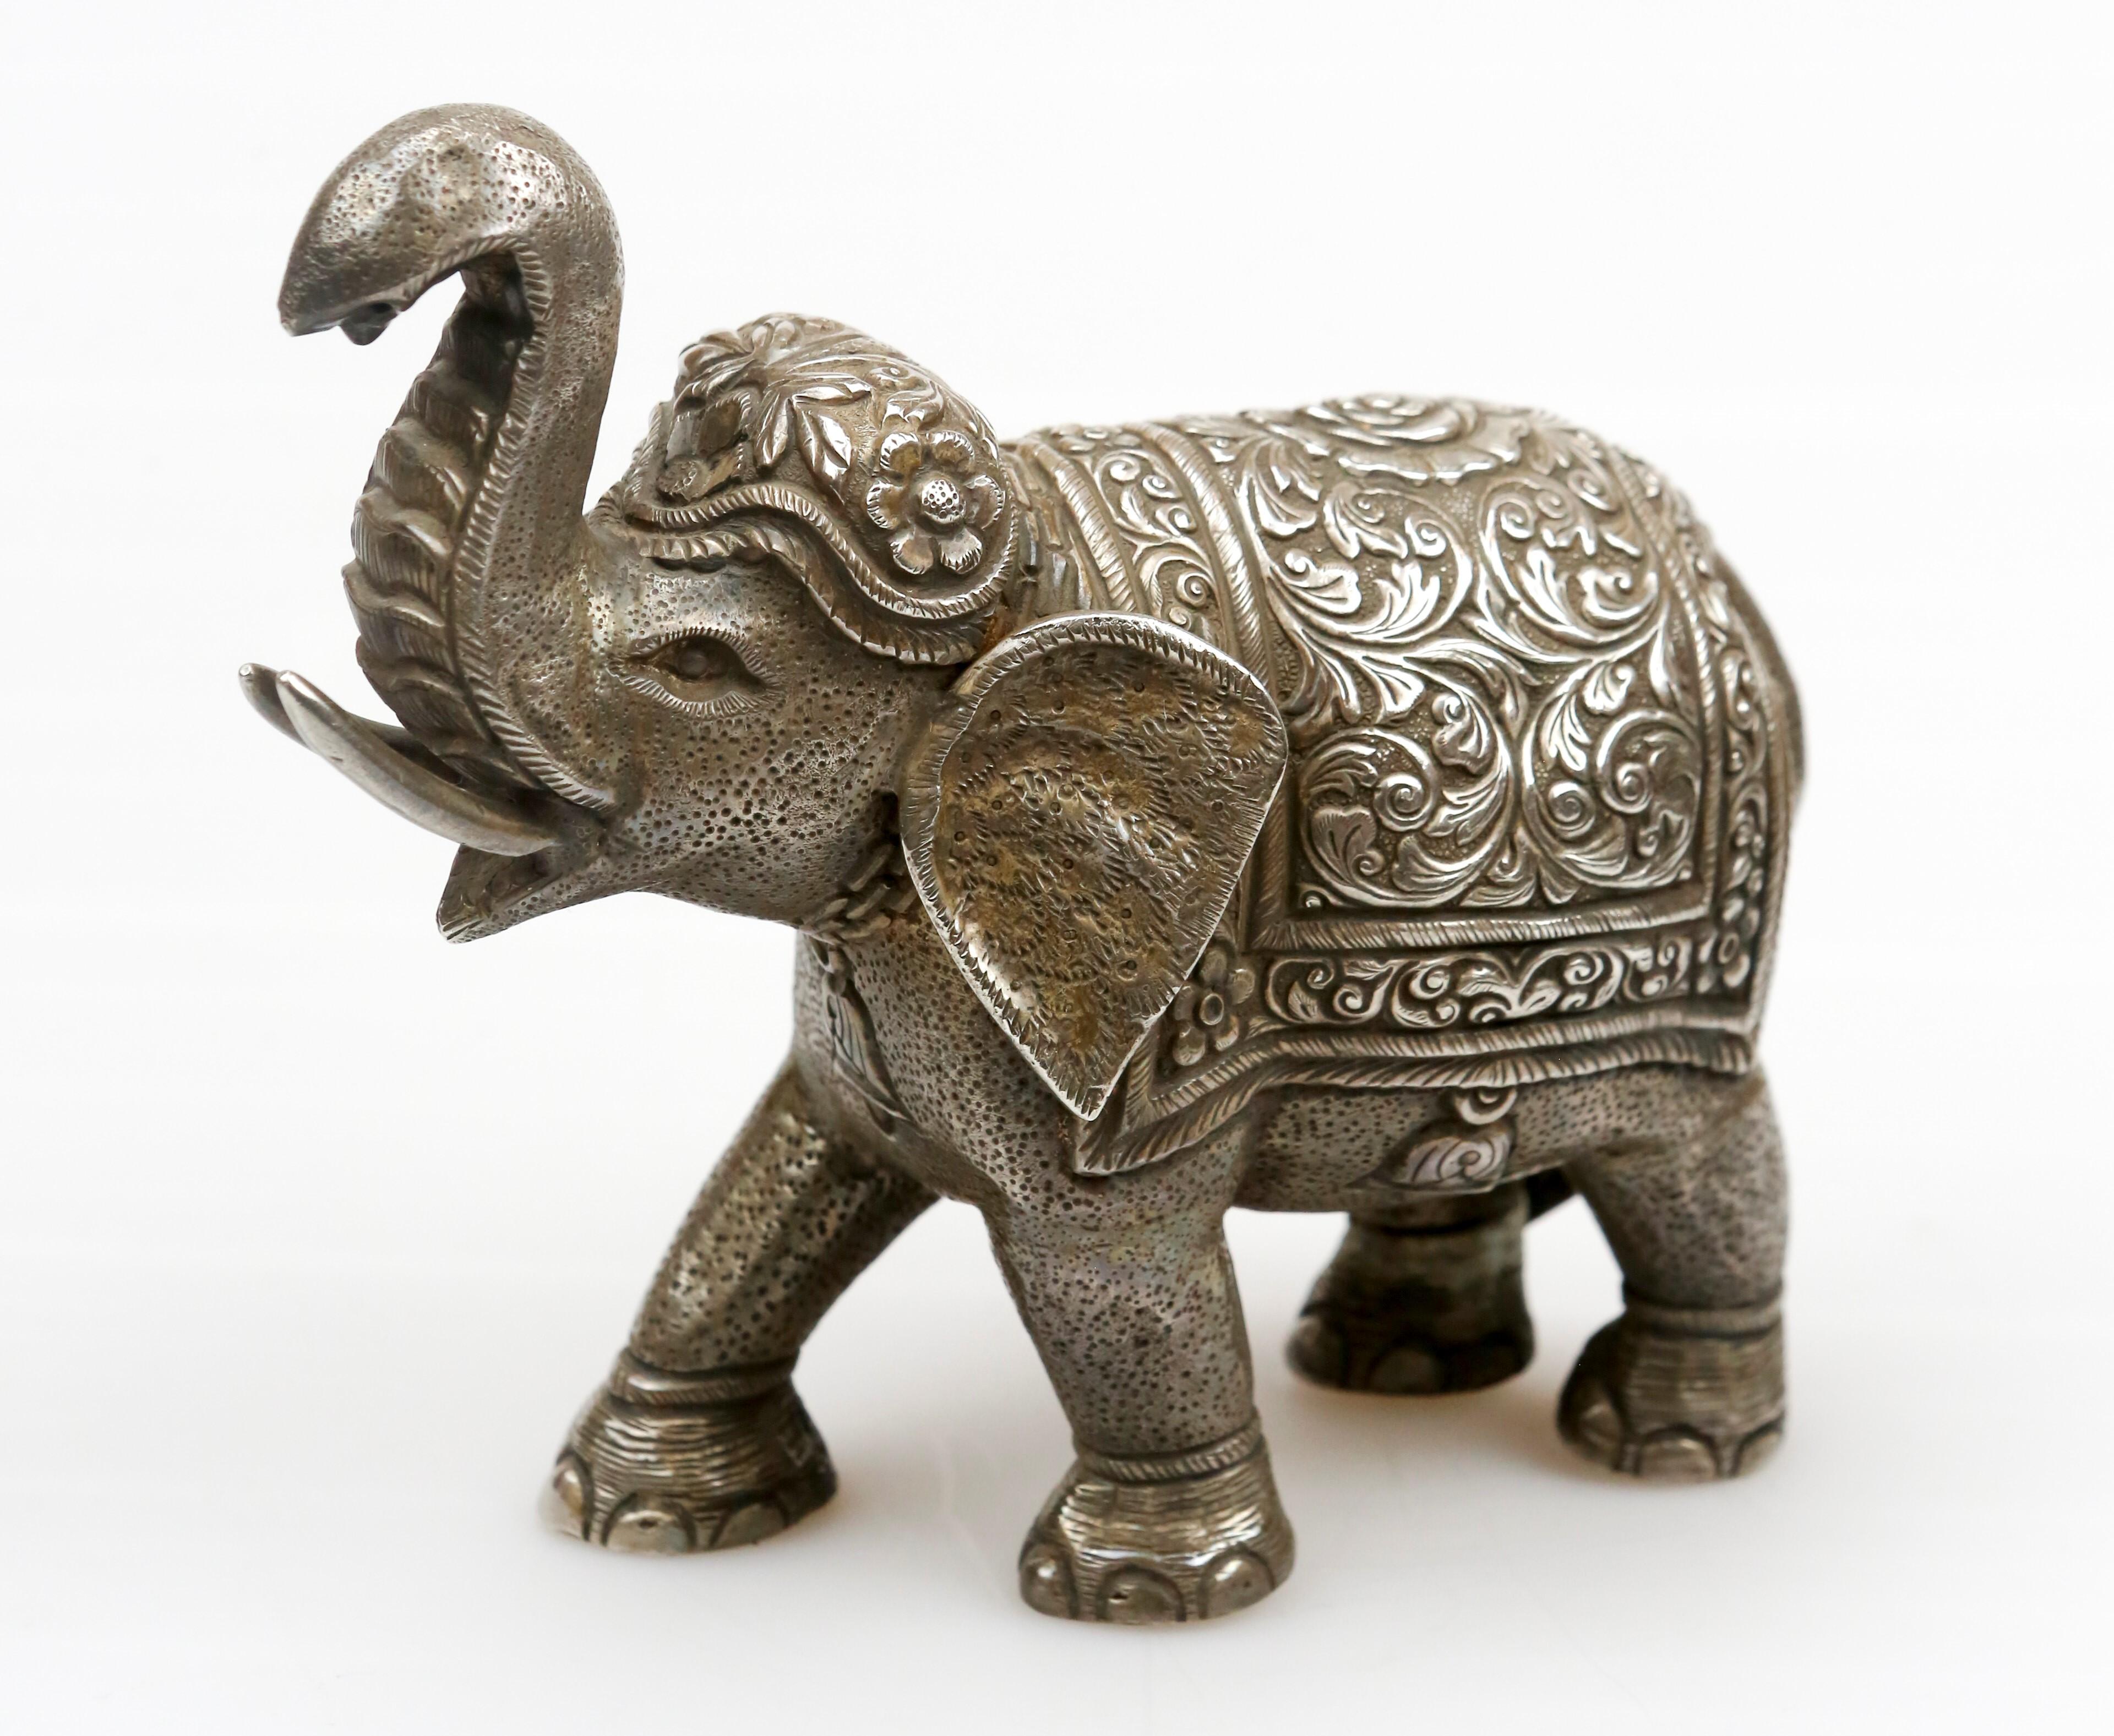 Kashmiri 92% Silver Elephant, Late 19th Century.
Elephants are a powerful role model for the spiritual lifestyle; they’re obedient to their leader, calm, nearly unstoppable when set on a path, and have large ears to hear more than speak. In short: